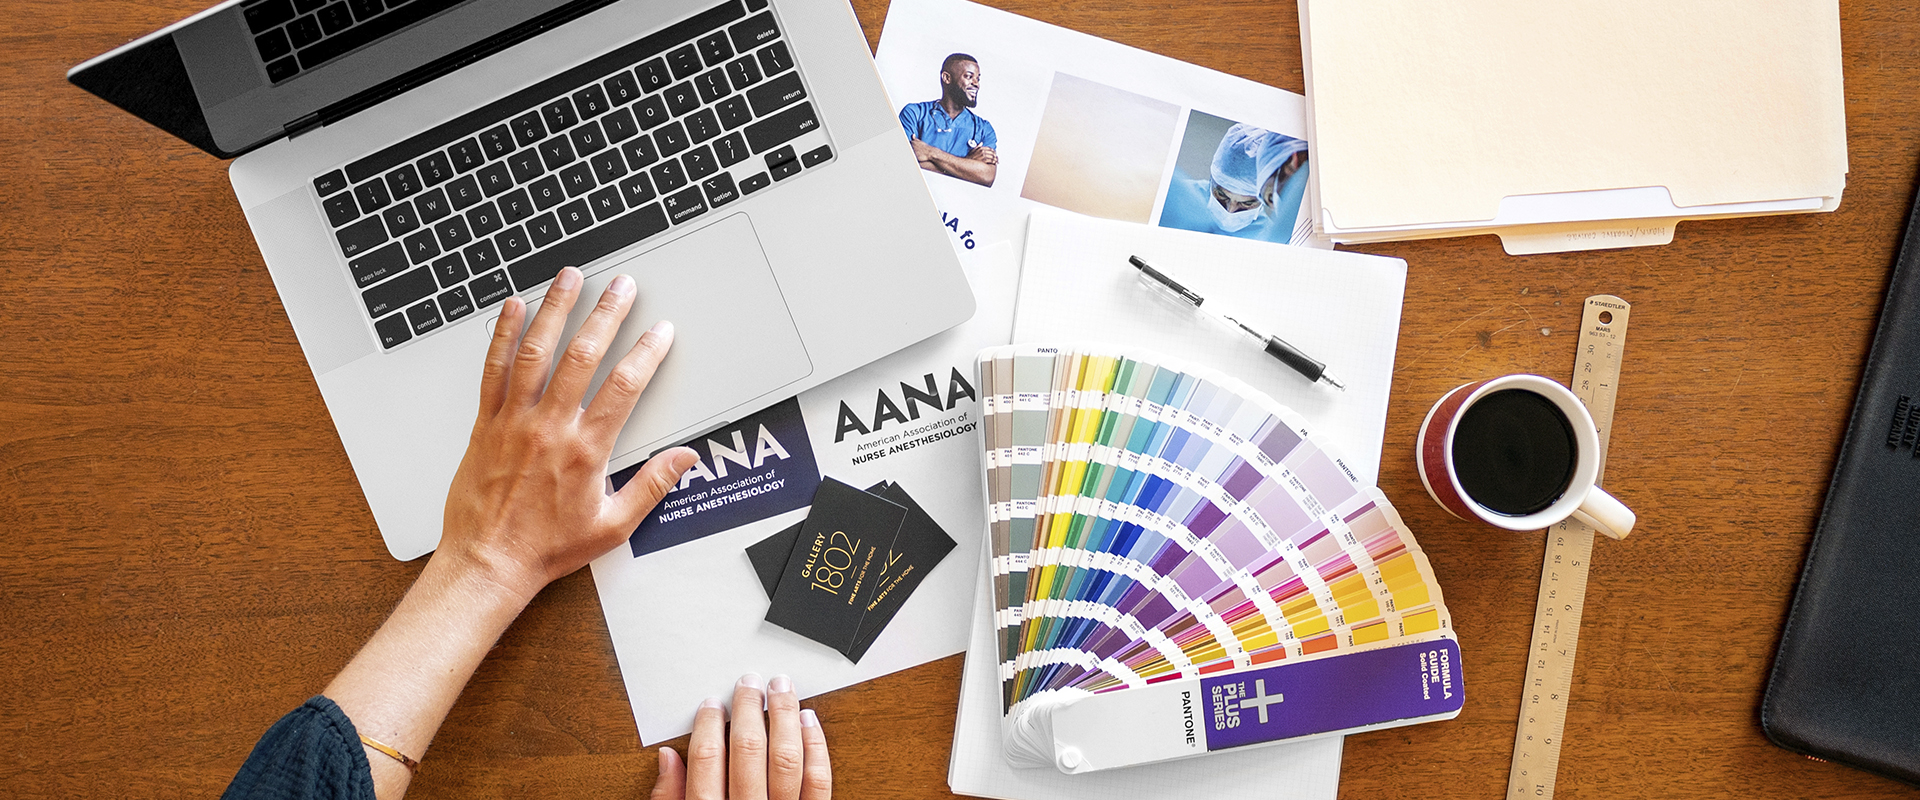 Tips for a successful rebrand header image